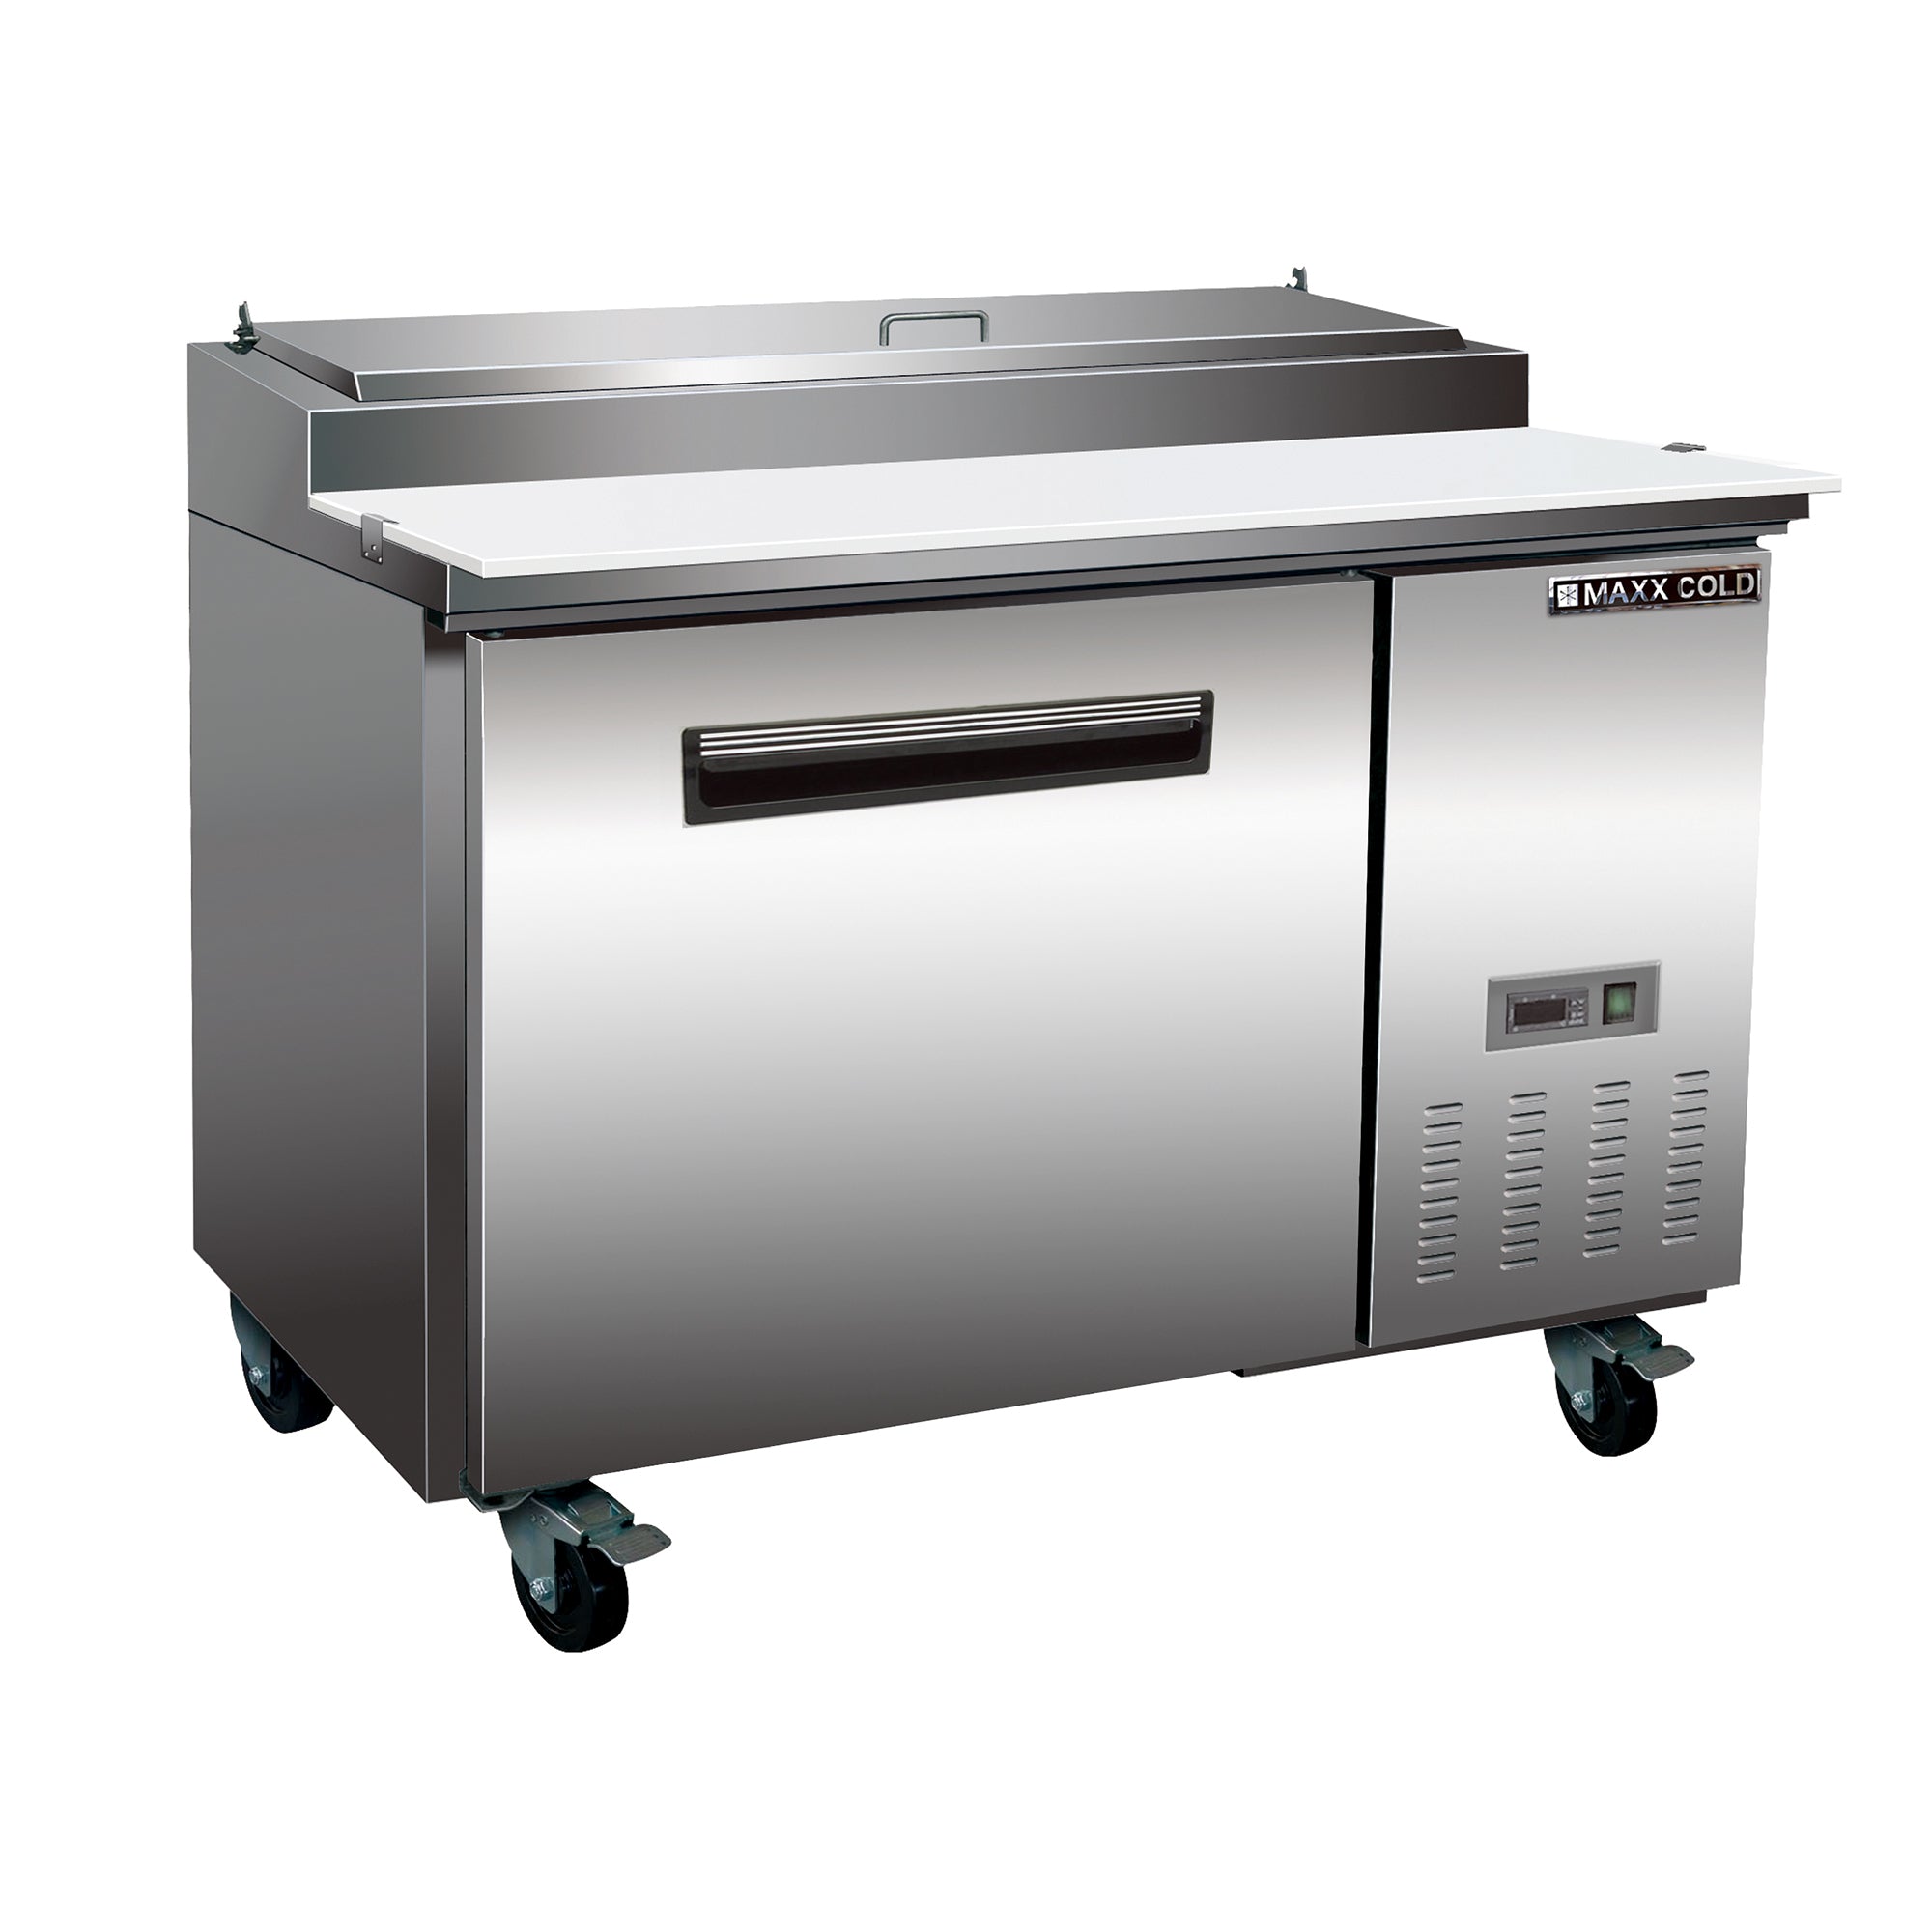 Maxx Cold - MXCPP50HC, Maxx Cold One-Door Refrigerated Pizza Prep Table, 47.4”W, 12 cu. ft. Storage Capacity, Equipped with (6) 4” Deep Pans and Cutting Board, in Stainless Steel